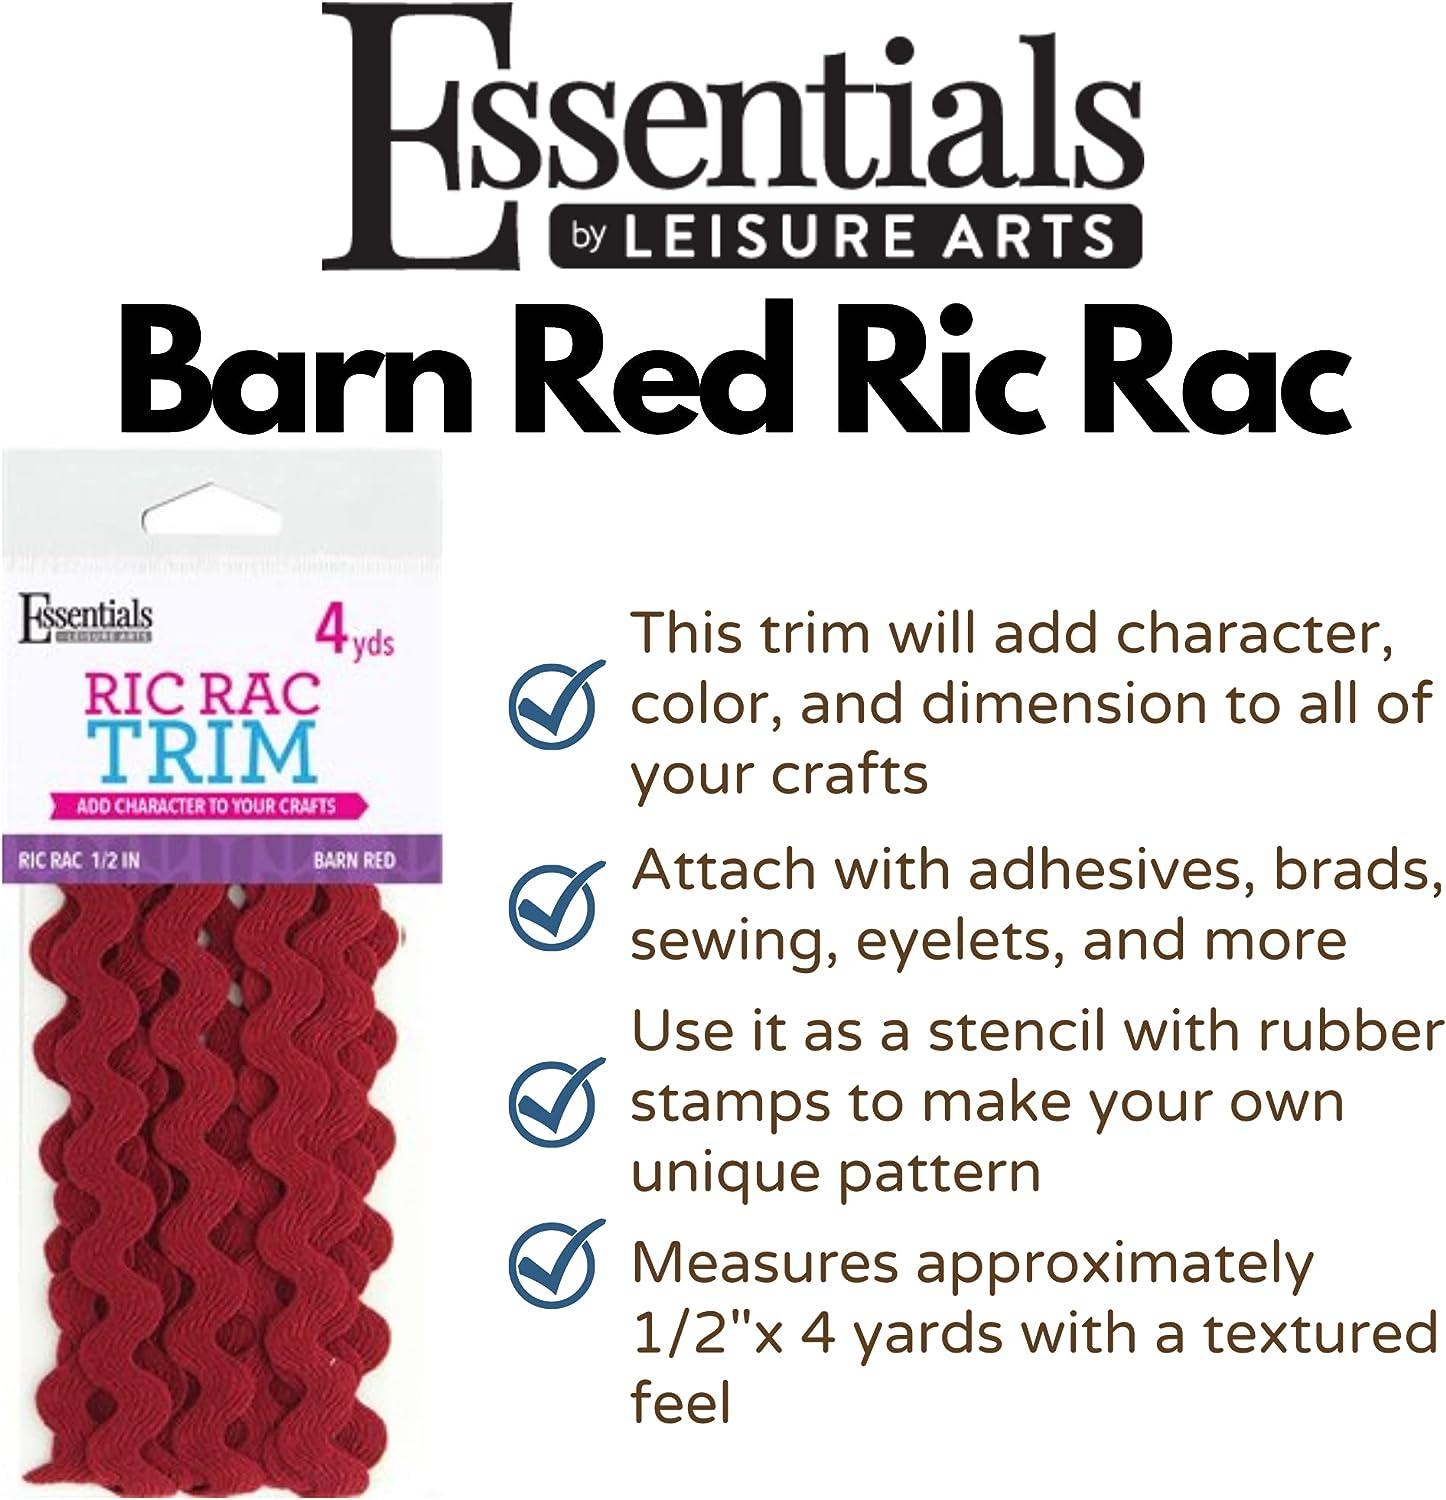 Essentials By Leisure Arts RIC Rac 1/2 4 Yards Barn Red - Rick